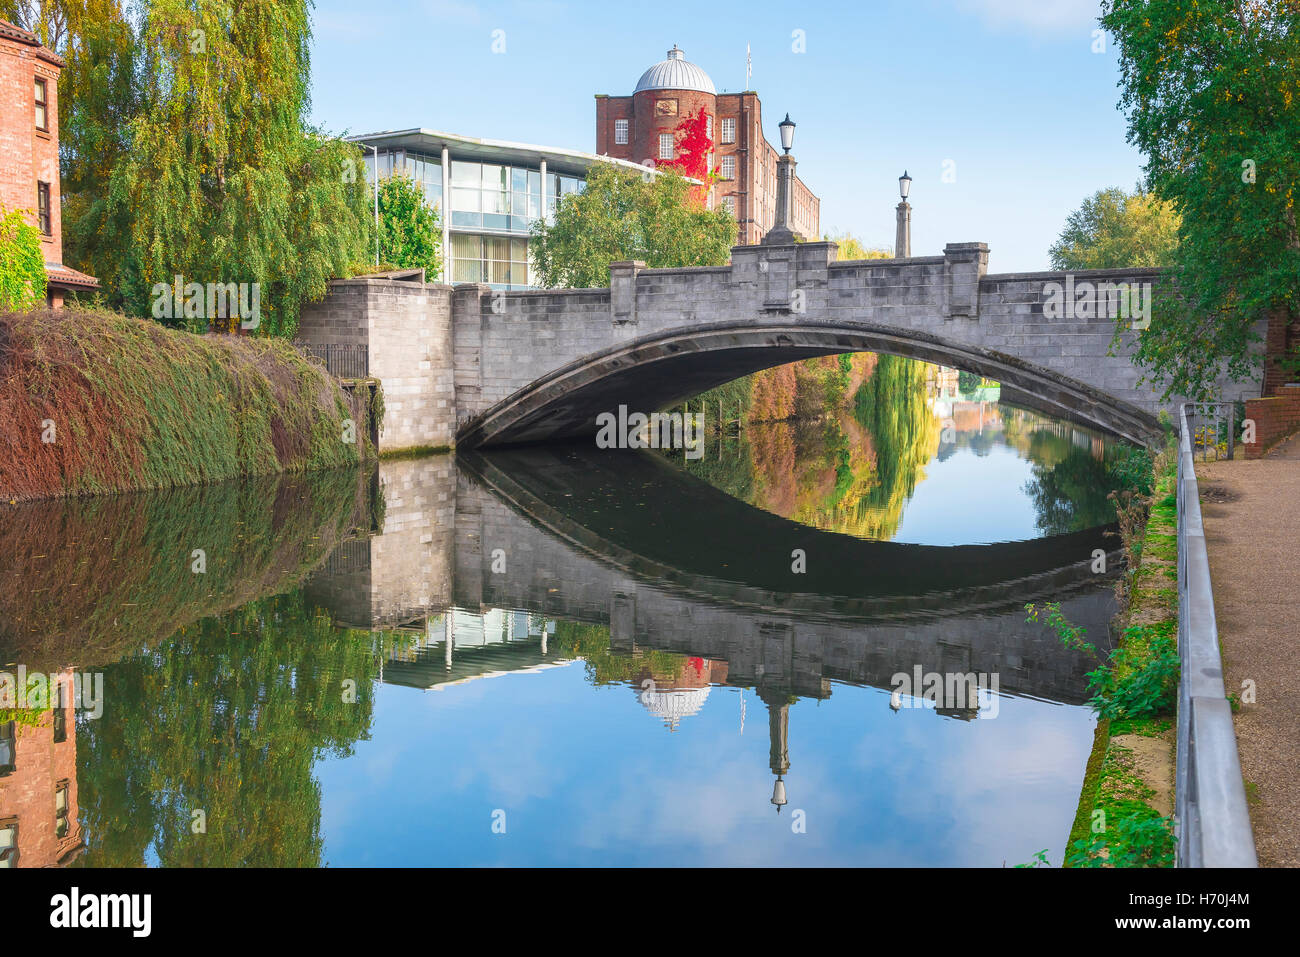 Whitefriars Bridge Norwich, view of the Whitefriars Bridge that spans the River Wensum in the centre of Norwich, England, UK. Stock Photo